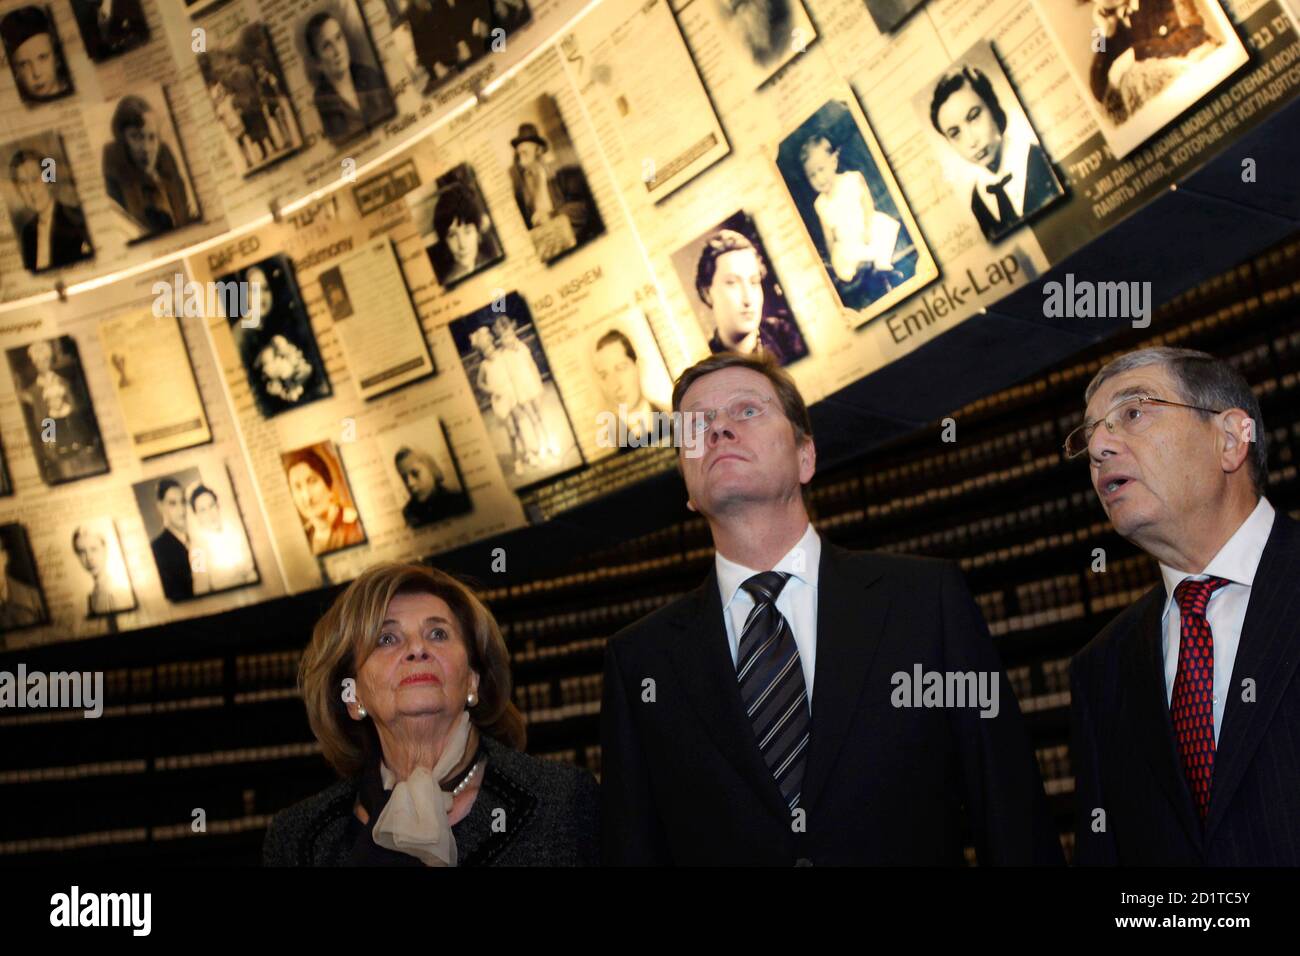 German Foreign Minister Dr. Guido Westerwelle (C), accompanied by Charlotte Knobloch (L), the President of the Central Council of German Jewry, and Director of Yad Vashem Avner Shalev (R), looks up at photos of slain Jews in the Hall of Names at the Yad Vashem Holocaust Memorial Museum in Jerusalem November 23, 2009.   REUTERS/David Silverman/Pool  (JERUSALEM POLITICS) Stock Photo